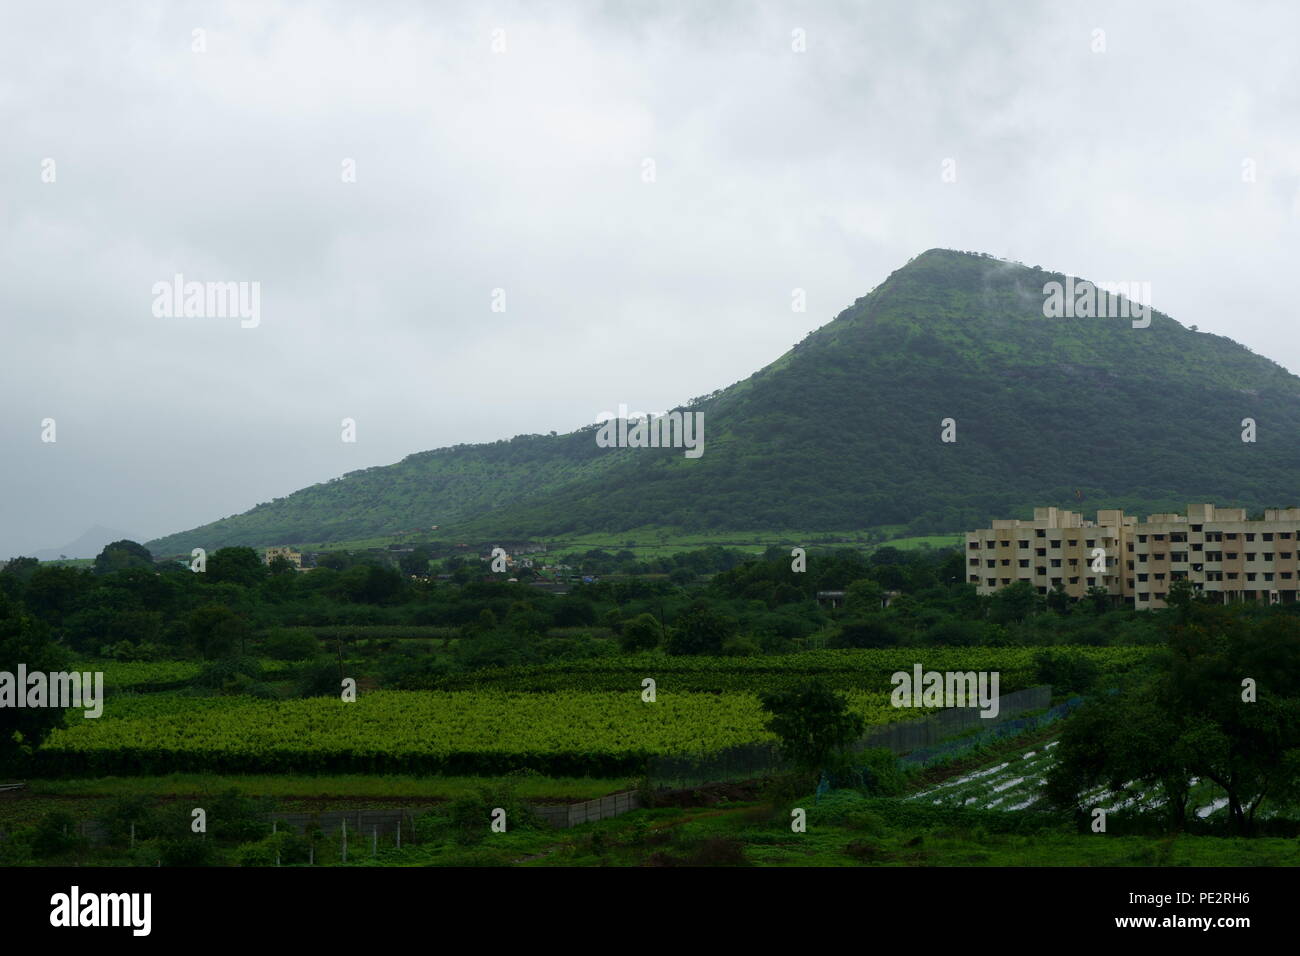 Grape farm and other agriculture beside mountain slope Stock Photo